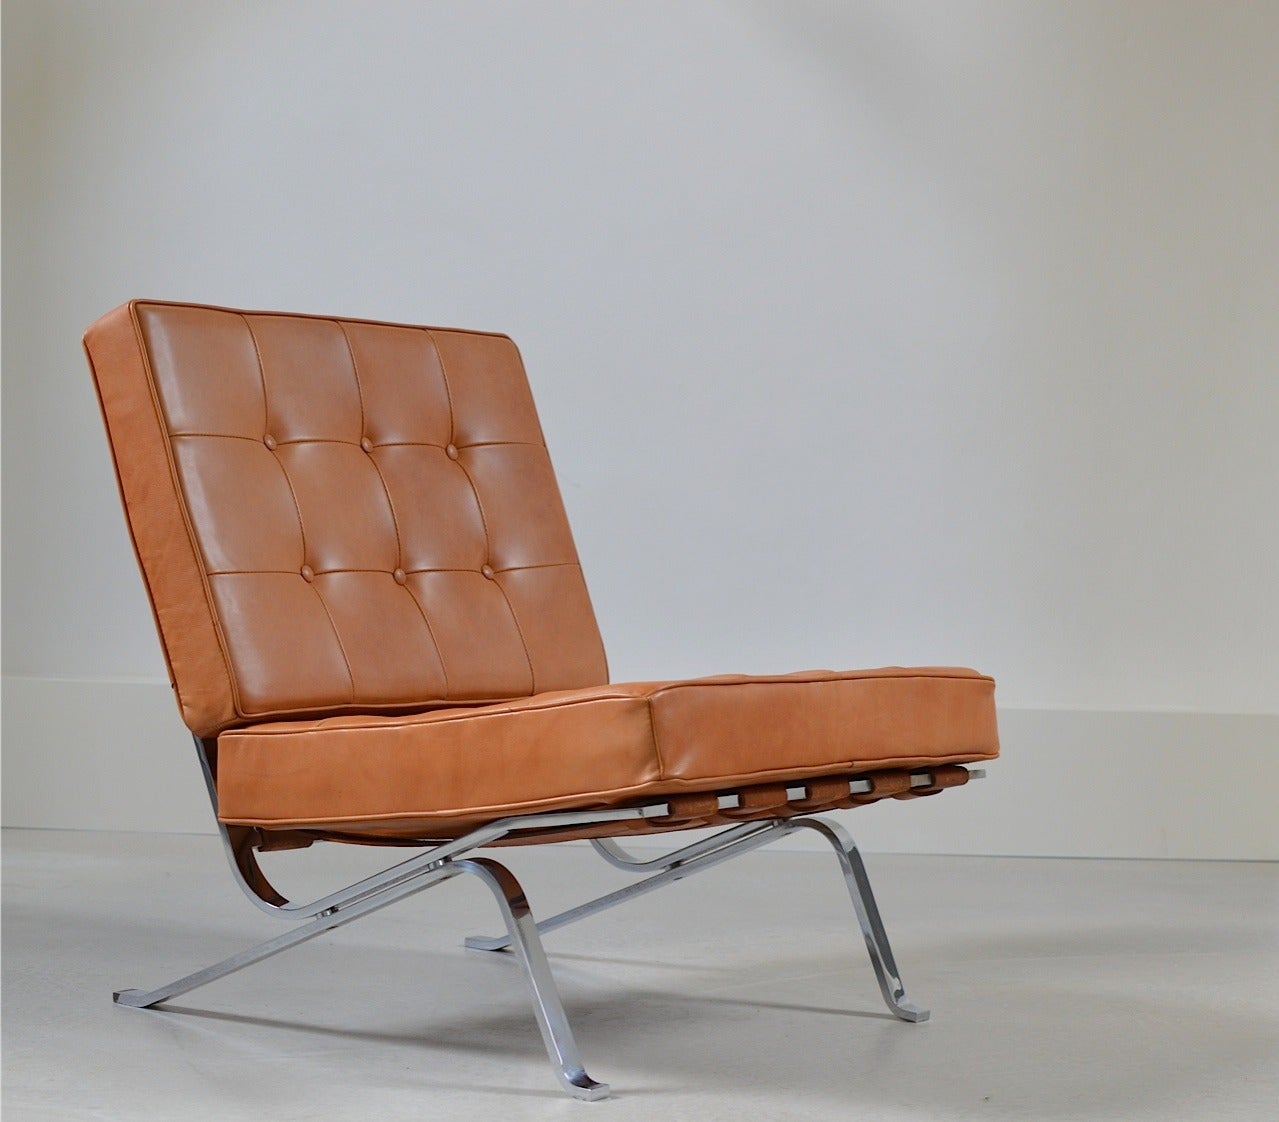 Rare Lounge Chair model RH301, also known as 'Hommage an Mies van der Rohe' since the chair was designed as a tribute to his idol Mies van der Rohe, by renowned Swiss architect Robert Haussmann and awarded with the 'compasso d'oro'.

This